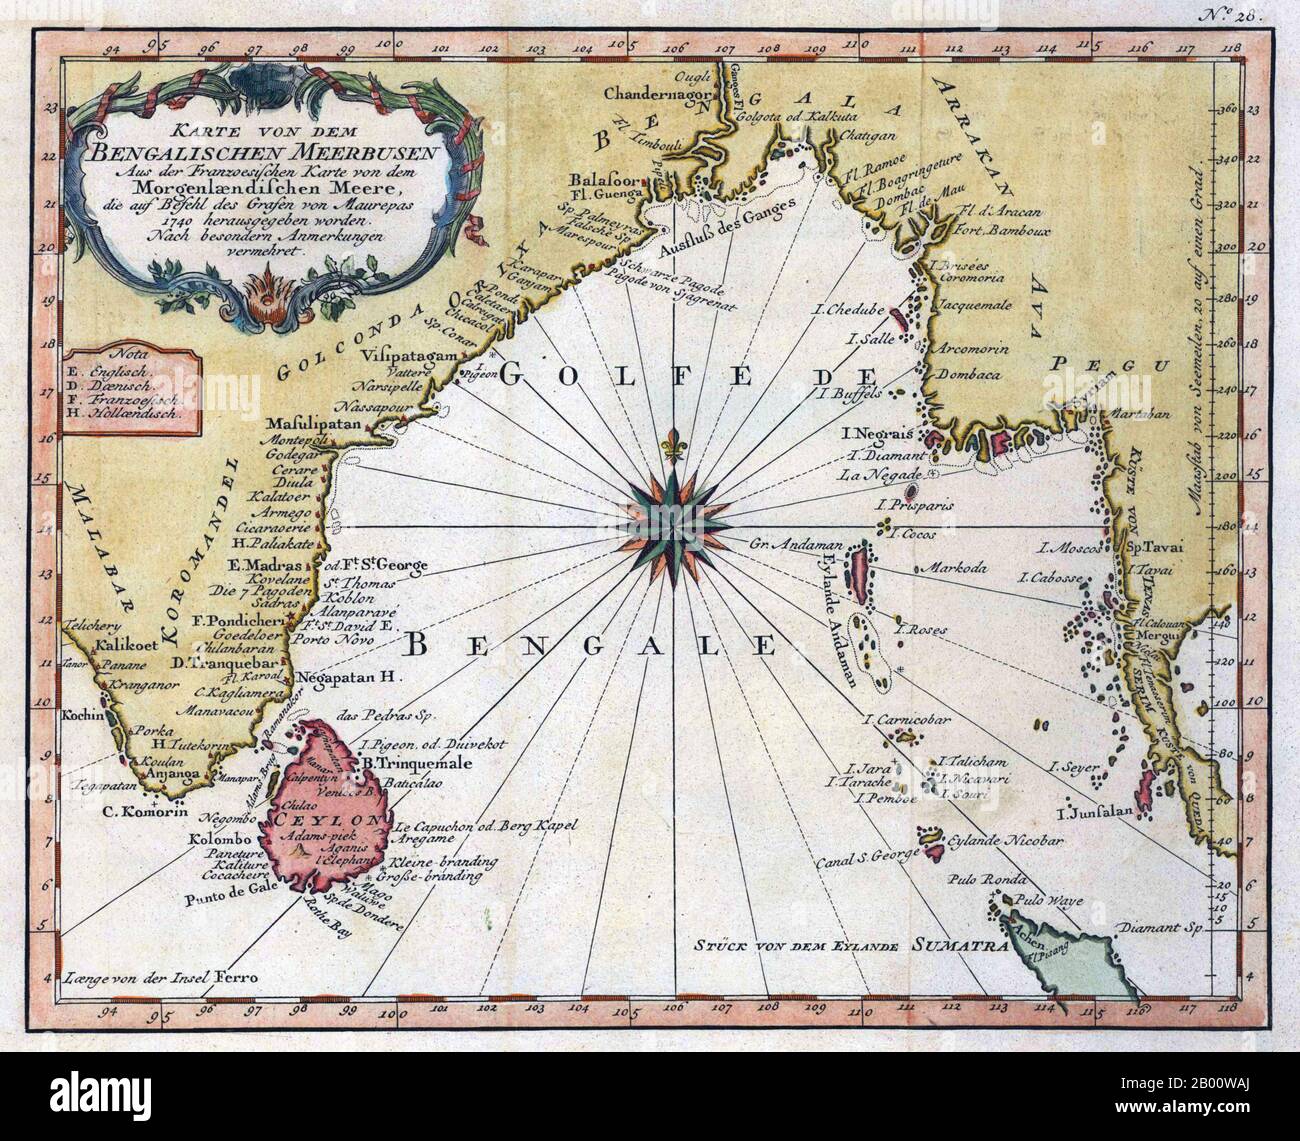 Bay of Bengal: Map of the 'Golfe de Bengal' and its shipping ports, including the Coromandel Coast, by Jacques-Nicolas Bellin (1703-1772), c. 1747.  The southeastern coastline of India, known as the Coromandel Coast, was home to three Portuguese settlements by late 1530 at Nagapattinam, São Tomé de Meliapore, and Pulicat. Later, in the 17th and 18th centuries, the Coromandel Coast was the scene of rivalries among European powers for control of the India trade and the 'Spice Trade'. Stock Photo